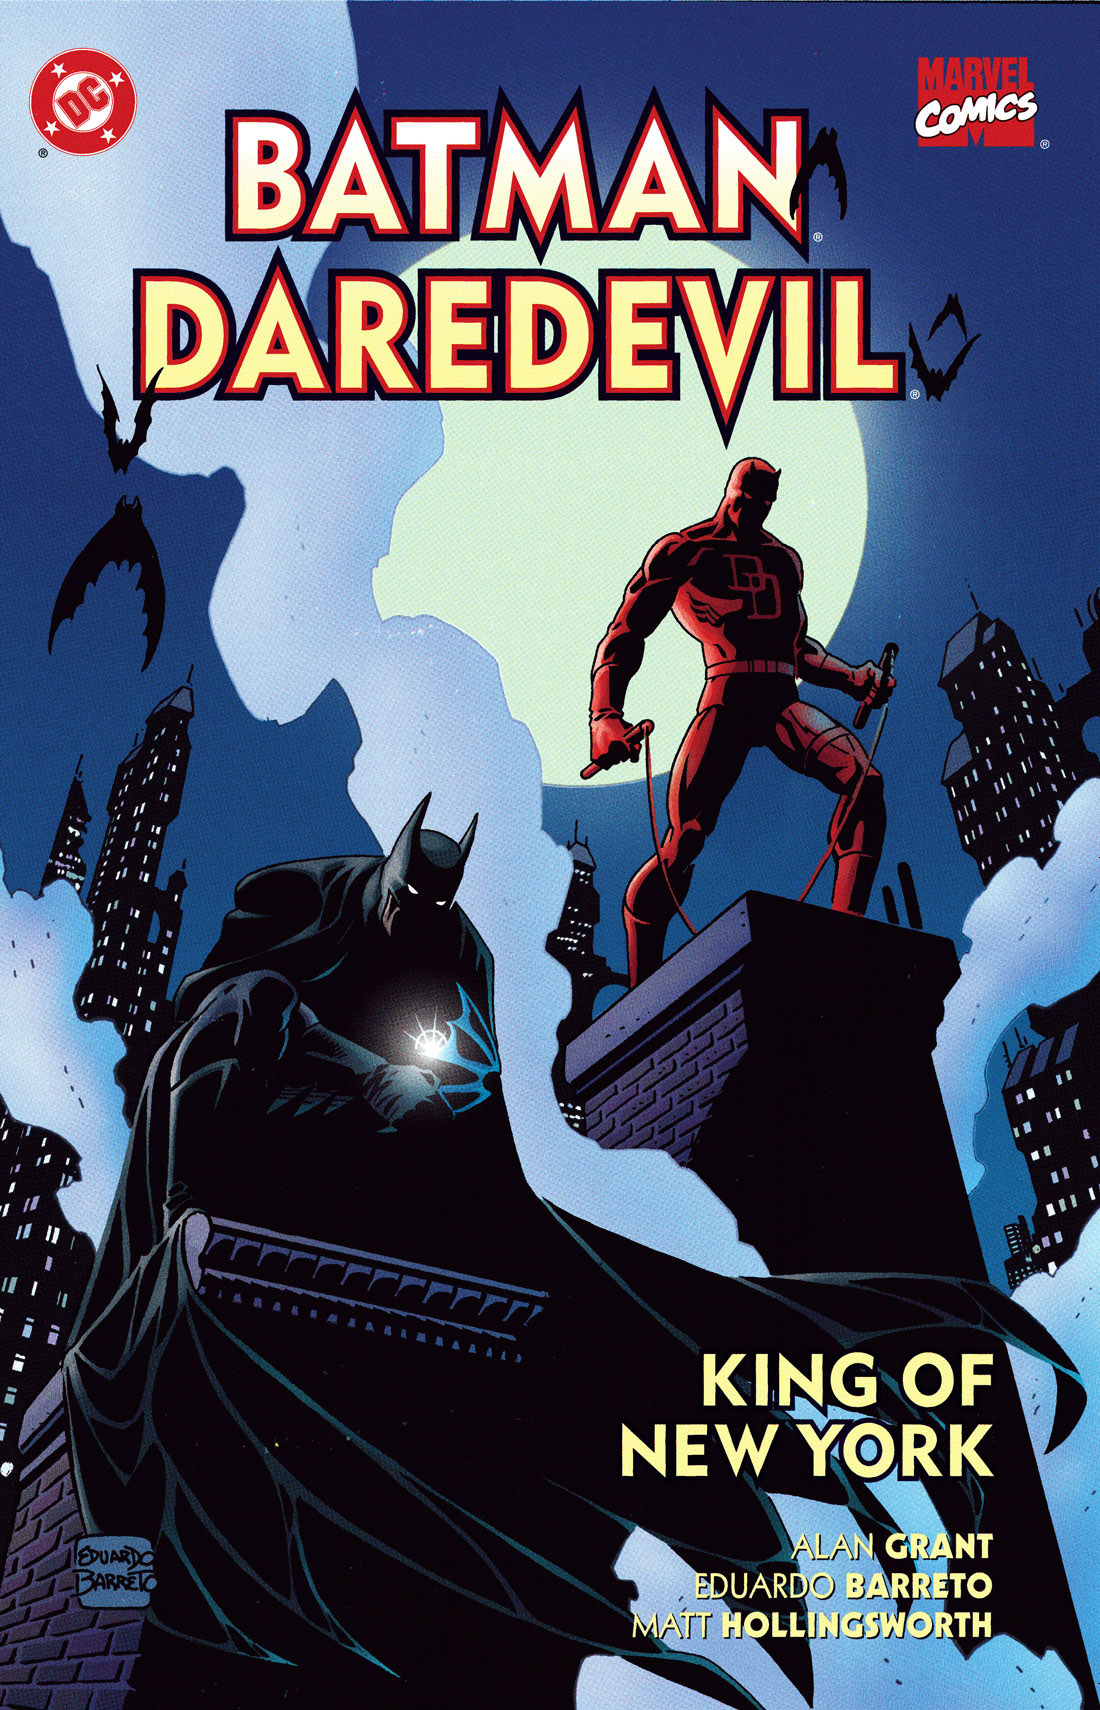 cover of the 2000 book "Batman, Daredevil: King of New York," a Marvel/DC crossover. The art is a nighttime image of Batman, crouched in the lower left, his features mostly shrouded in darkness except for his eyes, and Daredevil, standing a bit above him to the right, also with mostly just his eyes showing. They are both standing on top of a building, with skyscrapers and a full moon in the background. They are both staring intently down at something. 